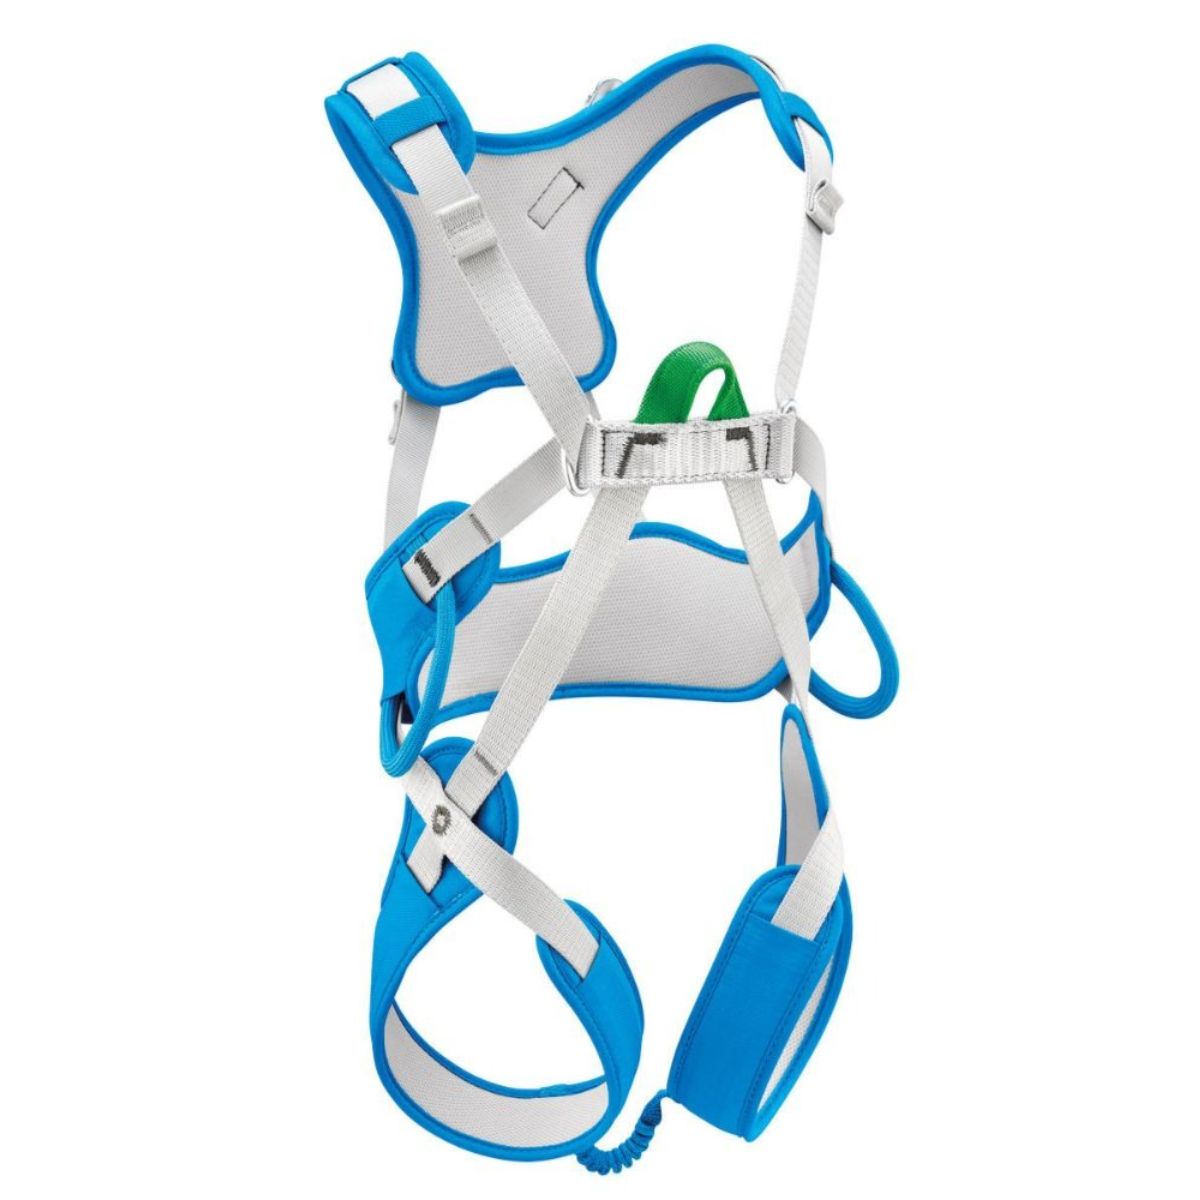 Ouistiti Harness for Kids - Blue 1